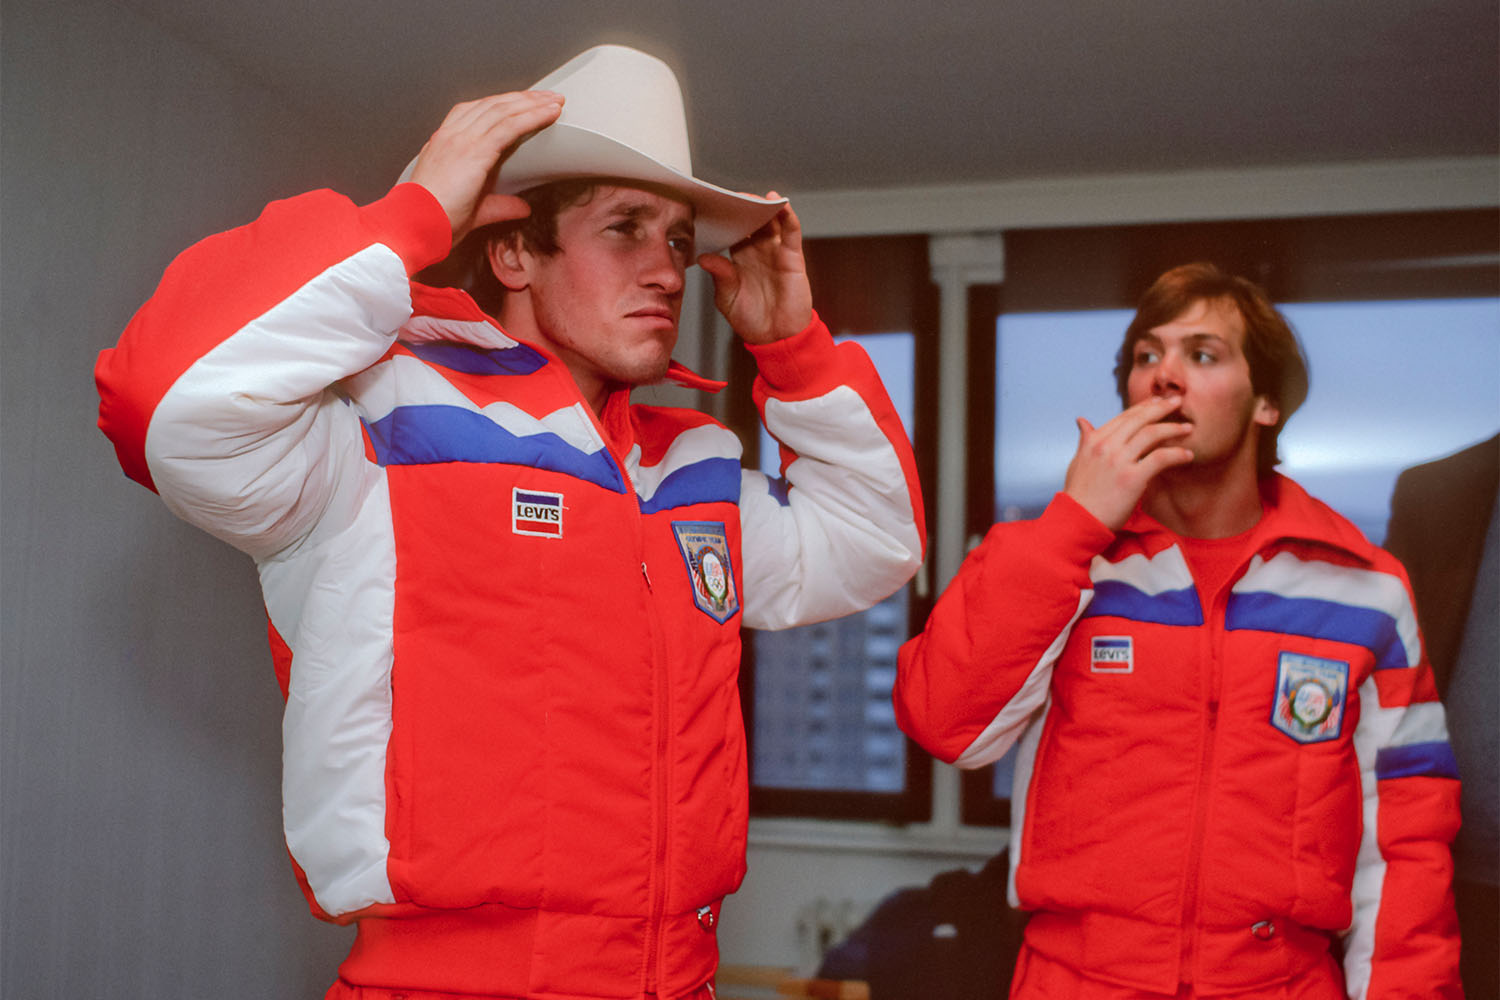 The 1984 Olympic Outfits for America